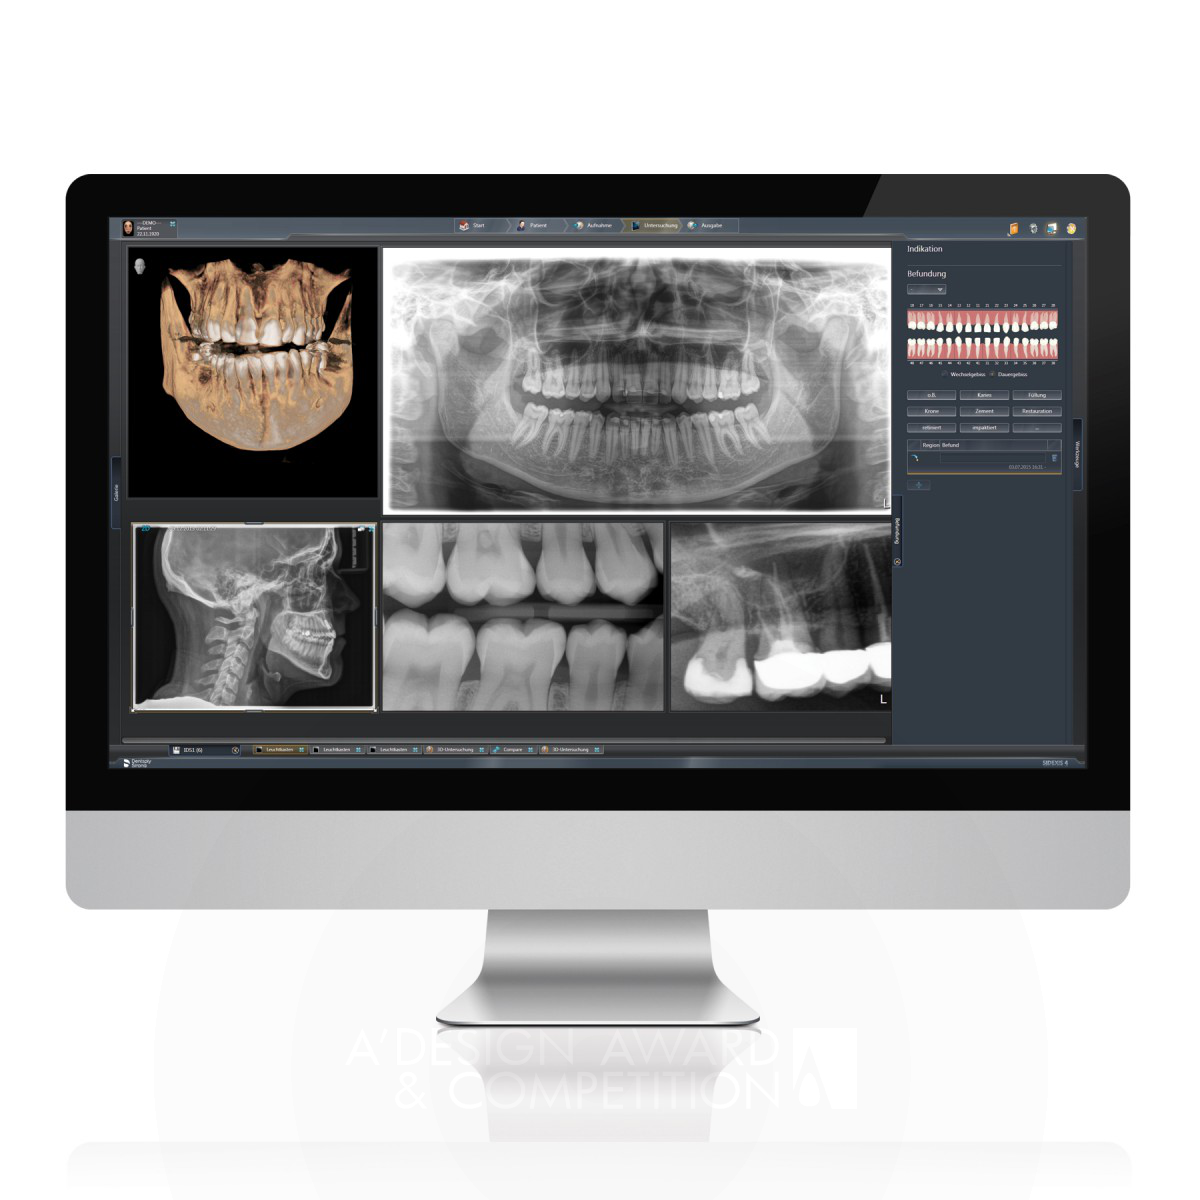 Sidexis 4 Dental X-Ray Software by Peggy Reuter-Heinrich